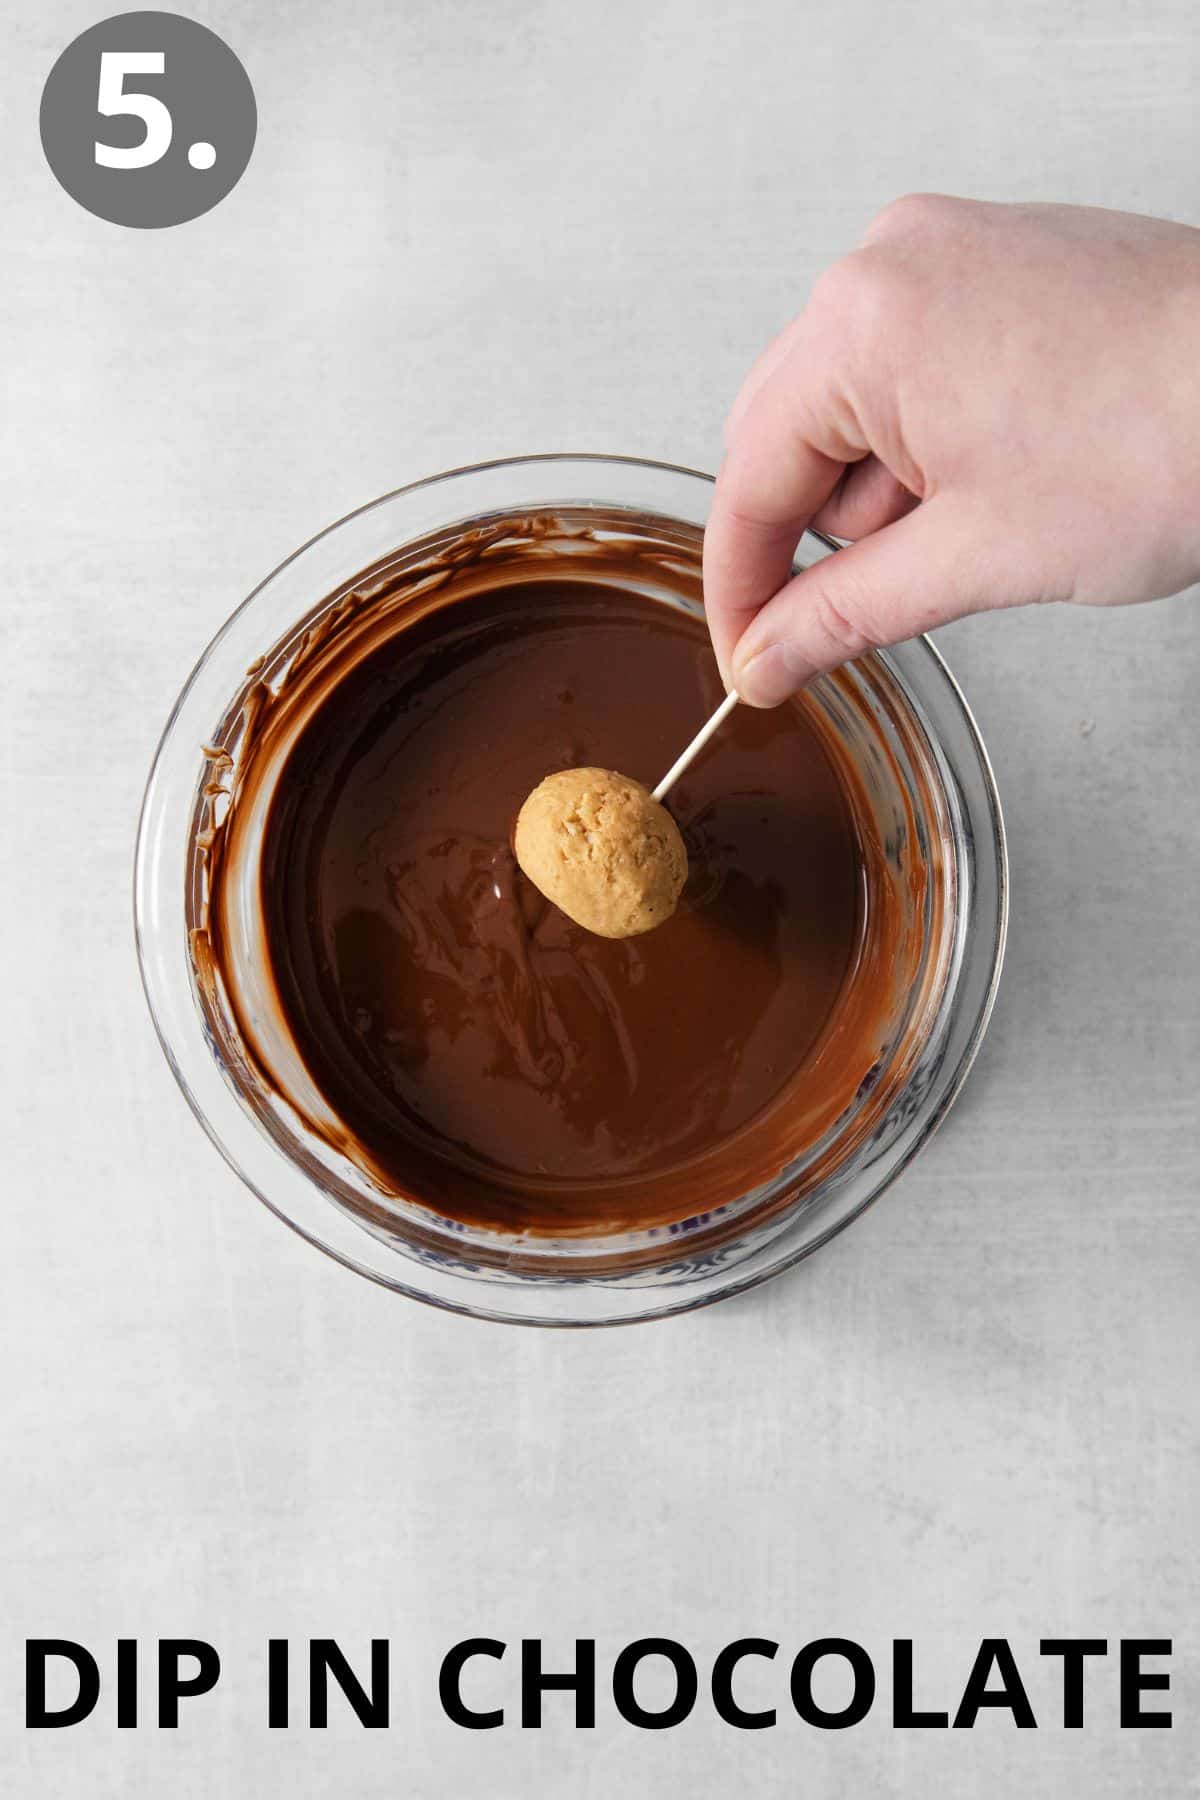 One peanut butter ball on a toothpick being dipped in melted chocolate